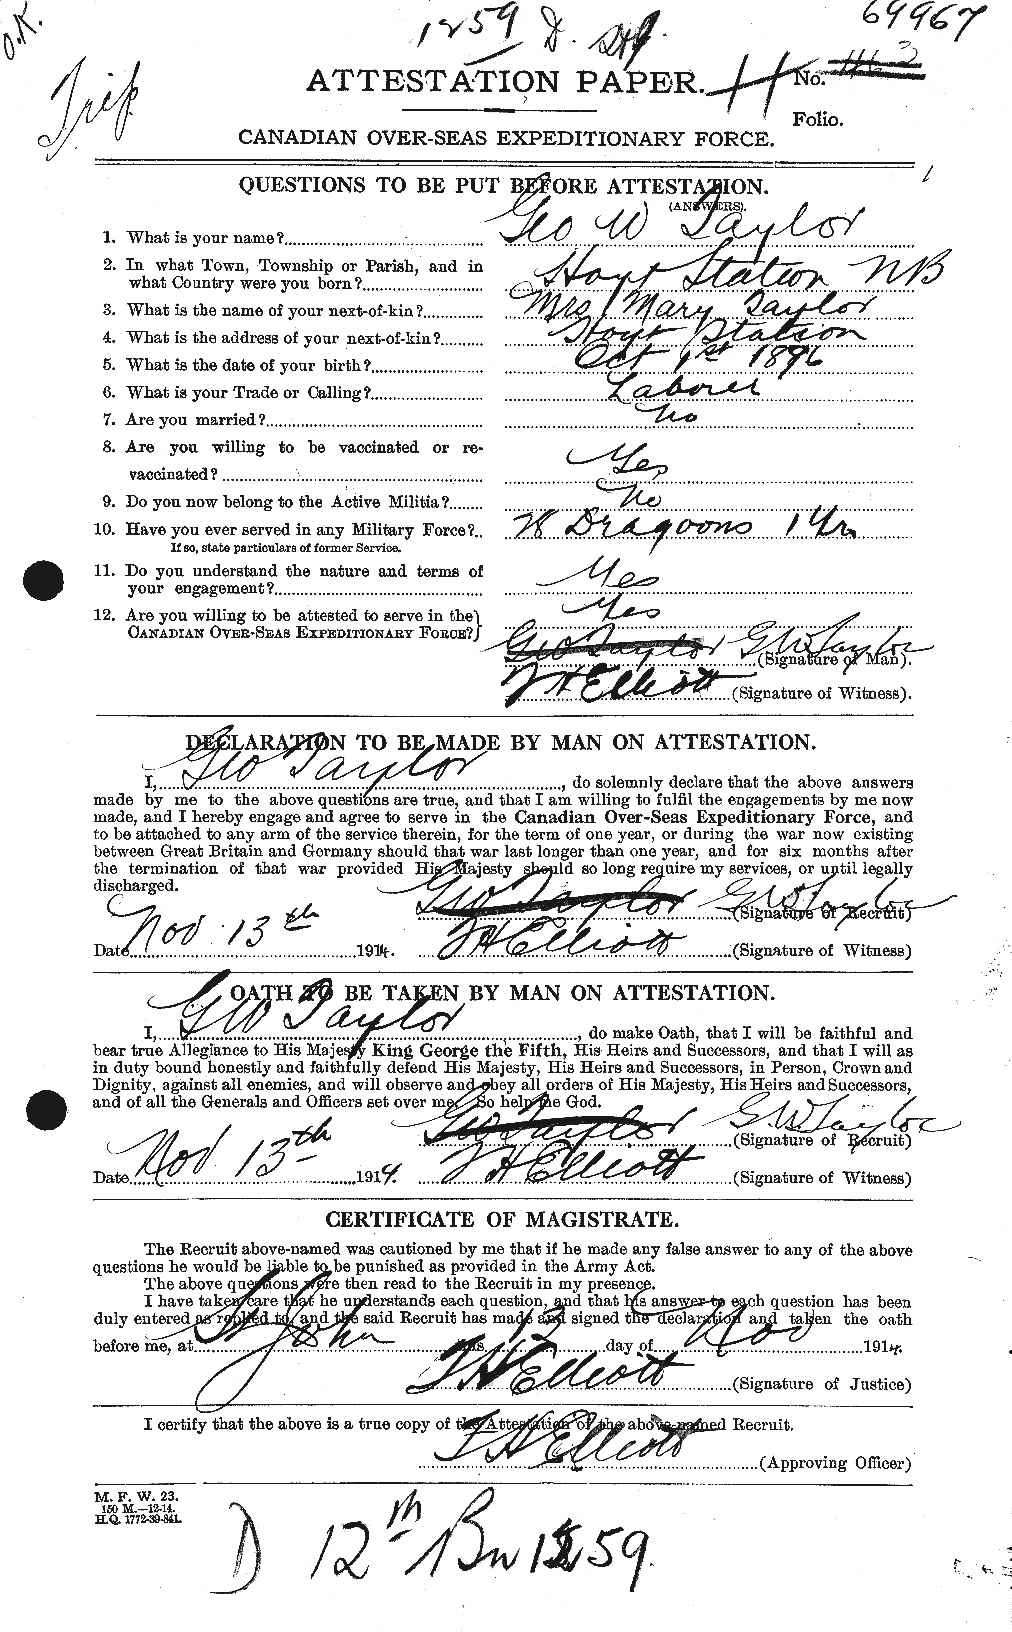 Personnel Records of the First World War - CEF 626363a